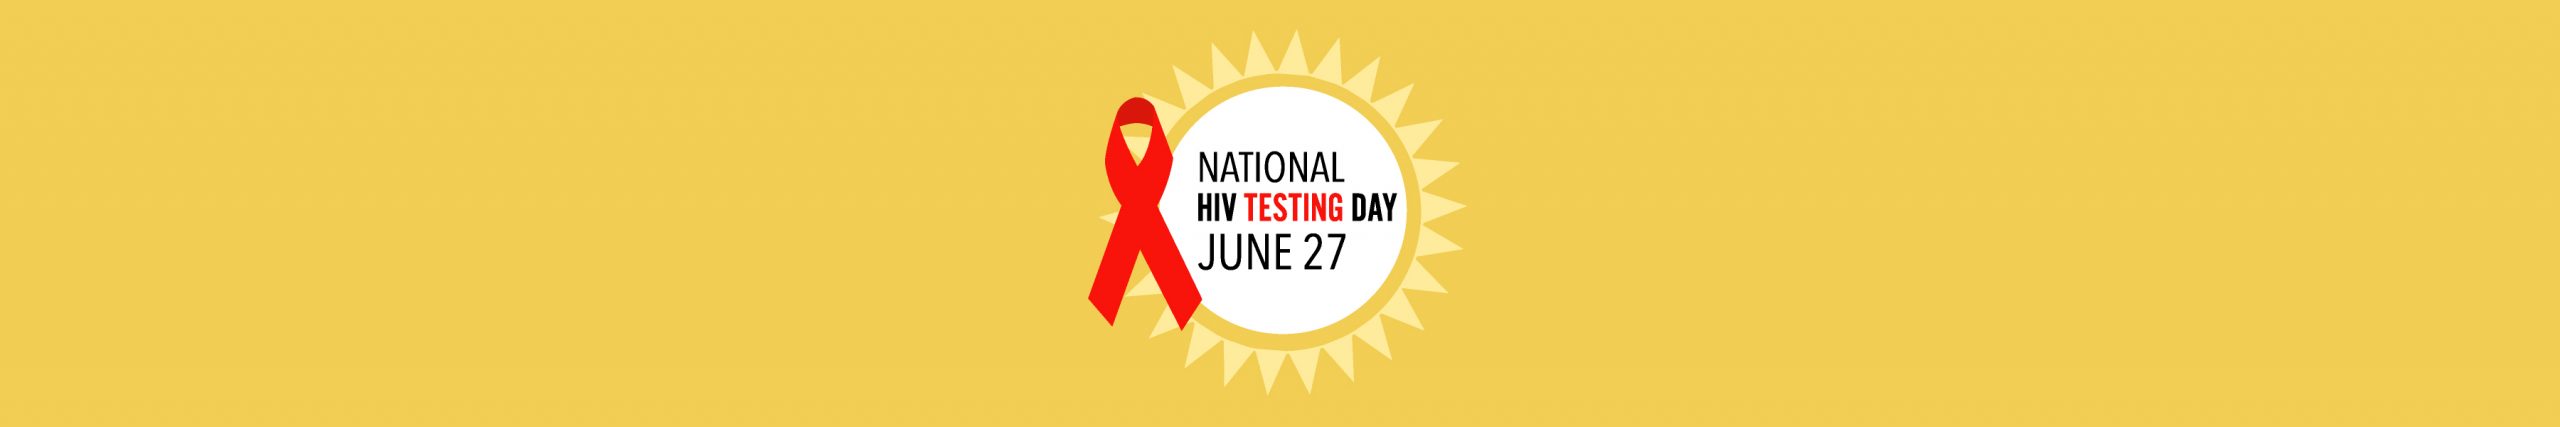 National HIV Testing Day Is June 27